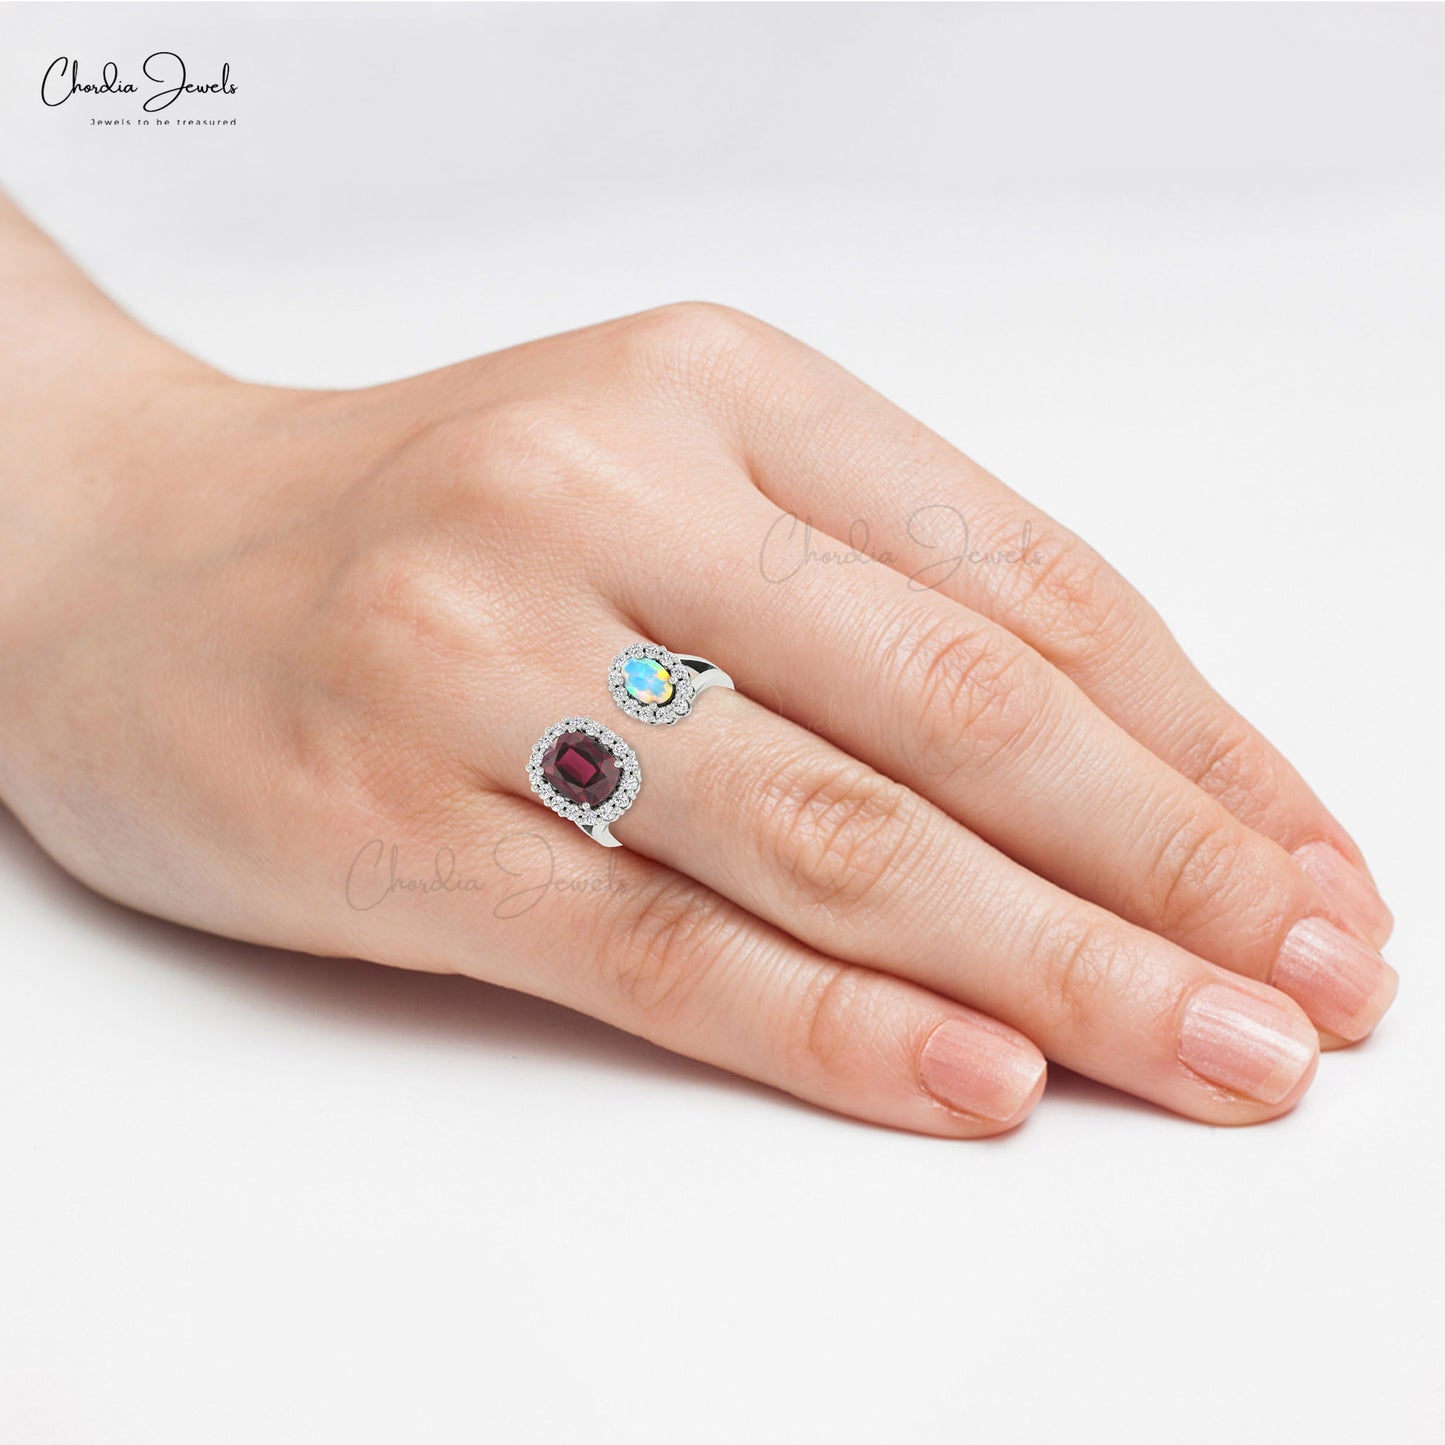 Double Halo Ring With Opal & Rhodolite Garnet Gemstone Solid 14k Gold Prong Set Diamond Ring For Gift